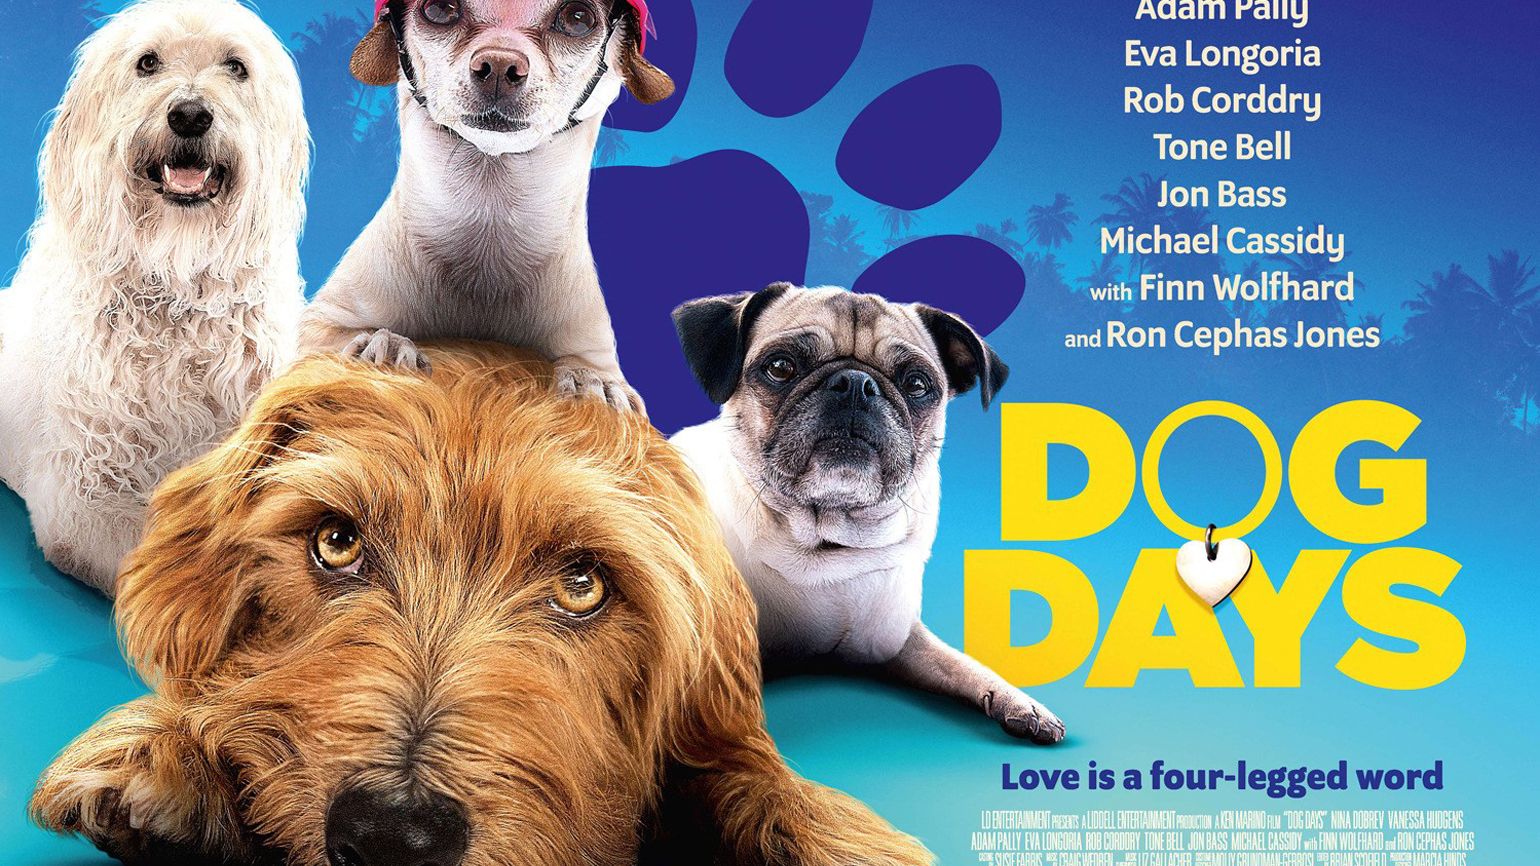 Promotional poster for 'Dog Days'